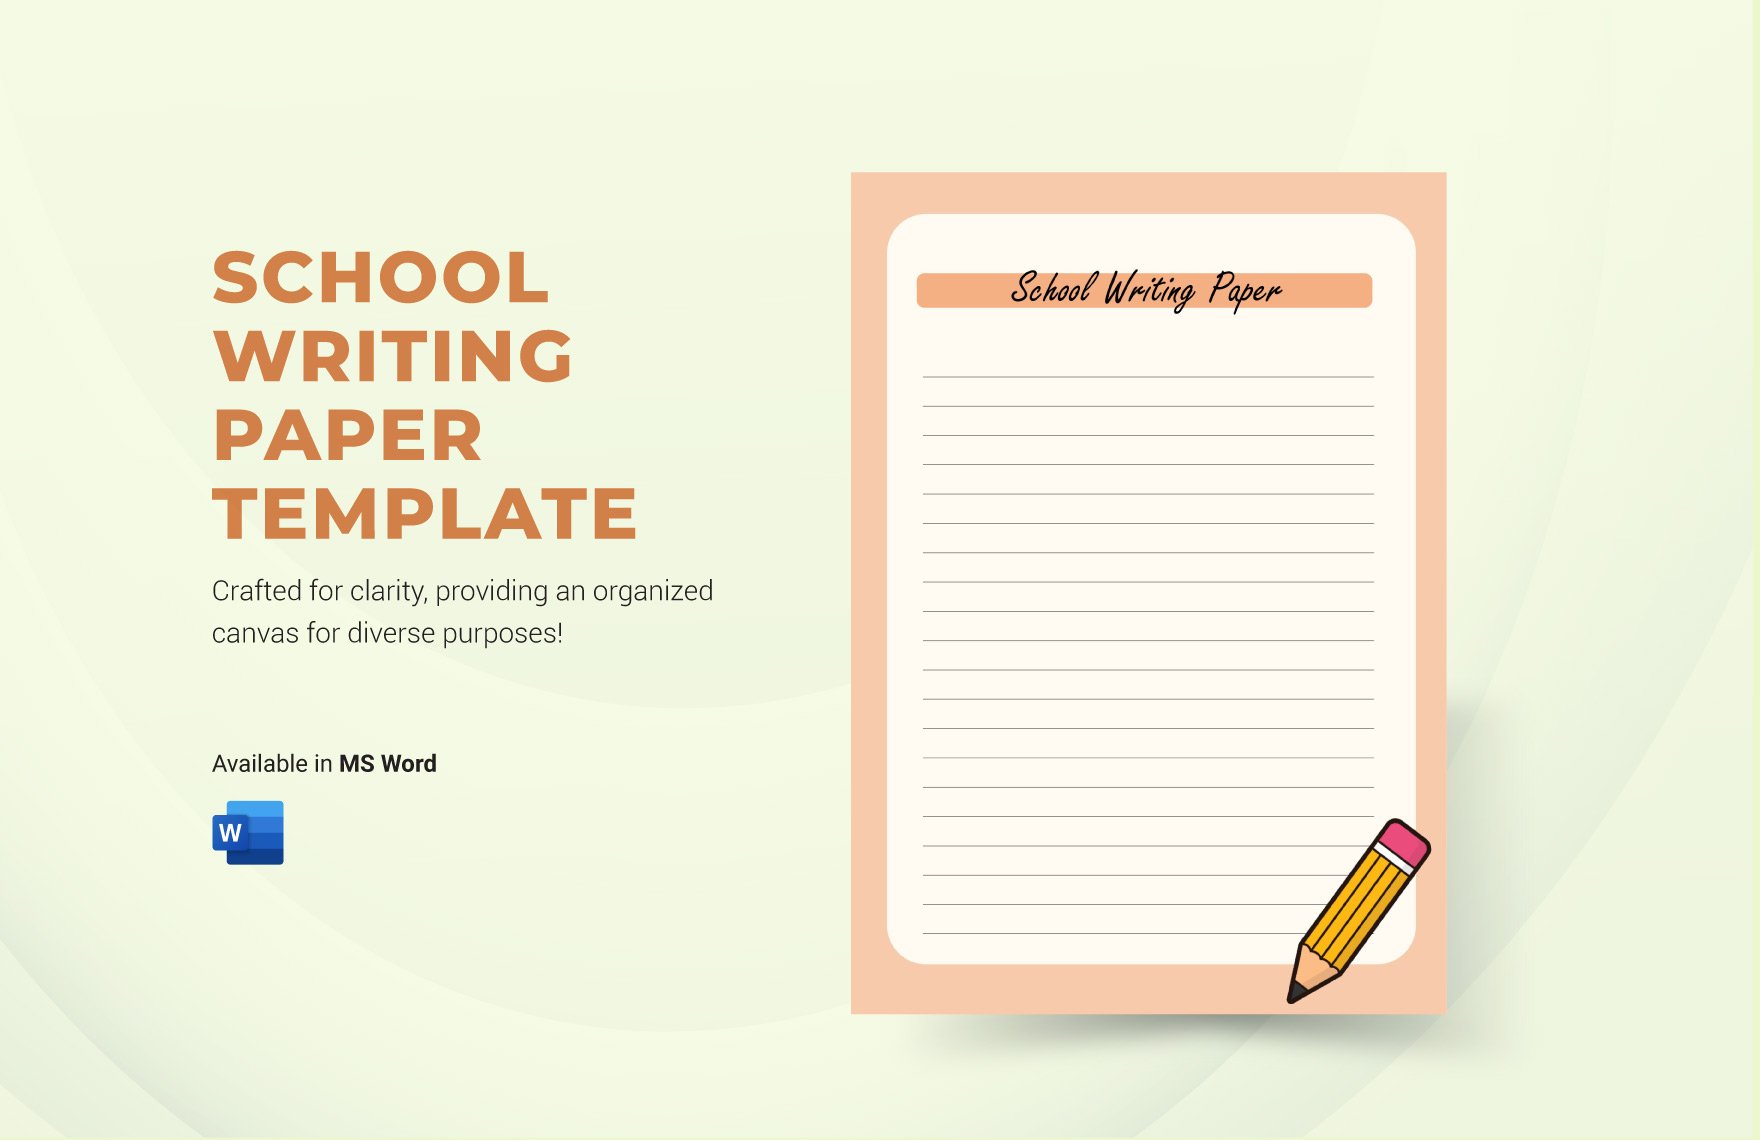 School Writing Paper Template